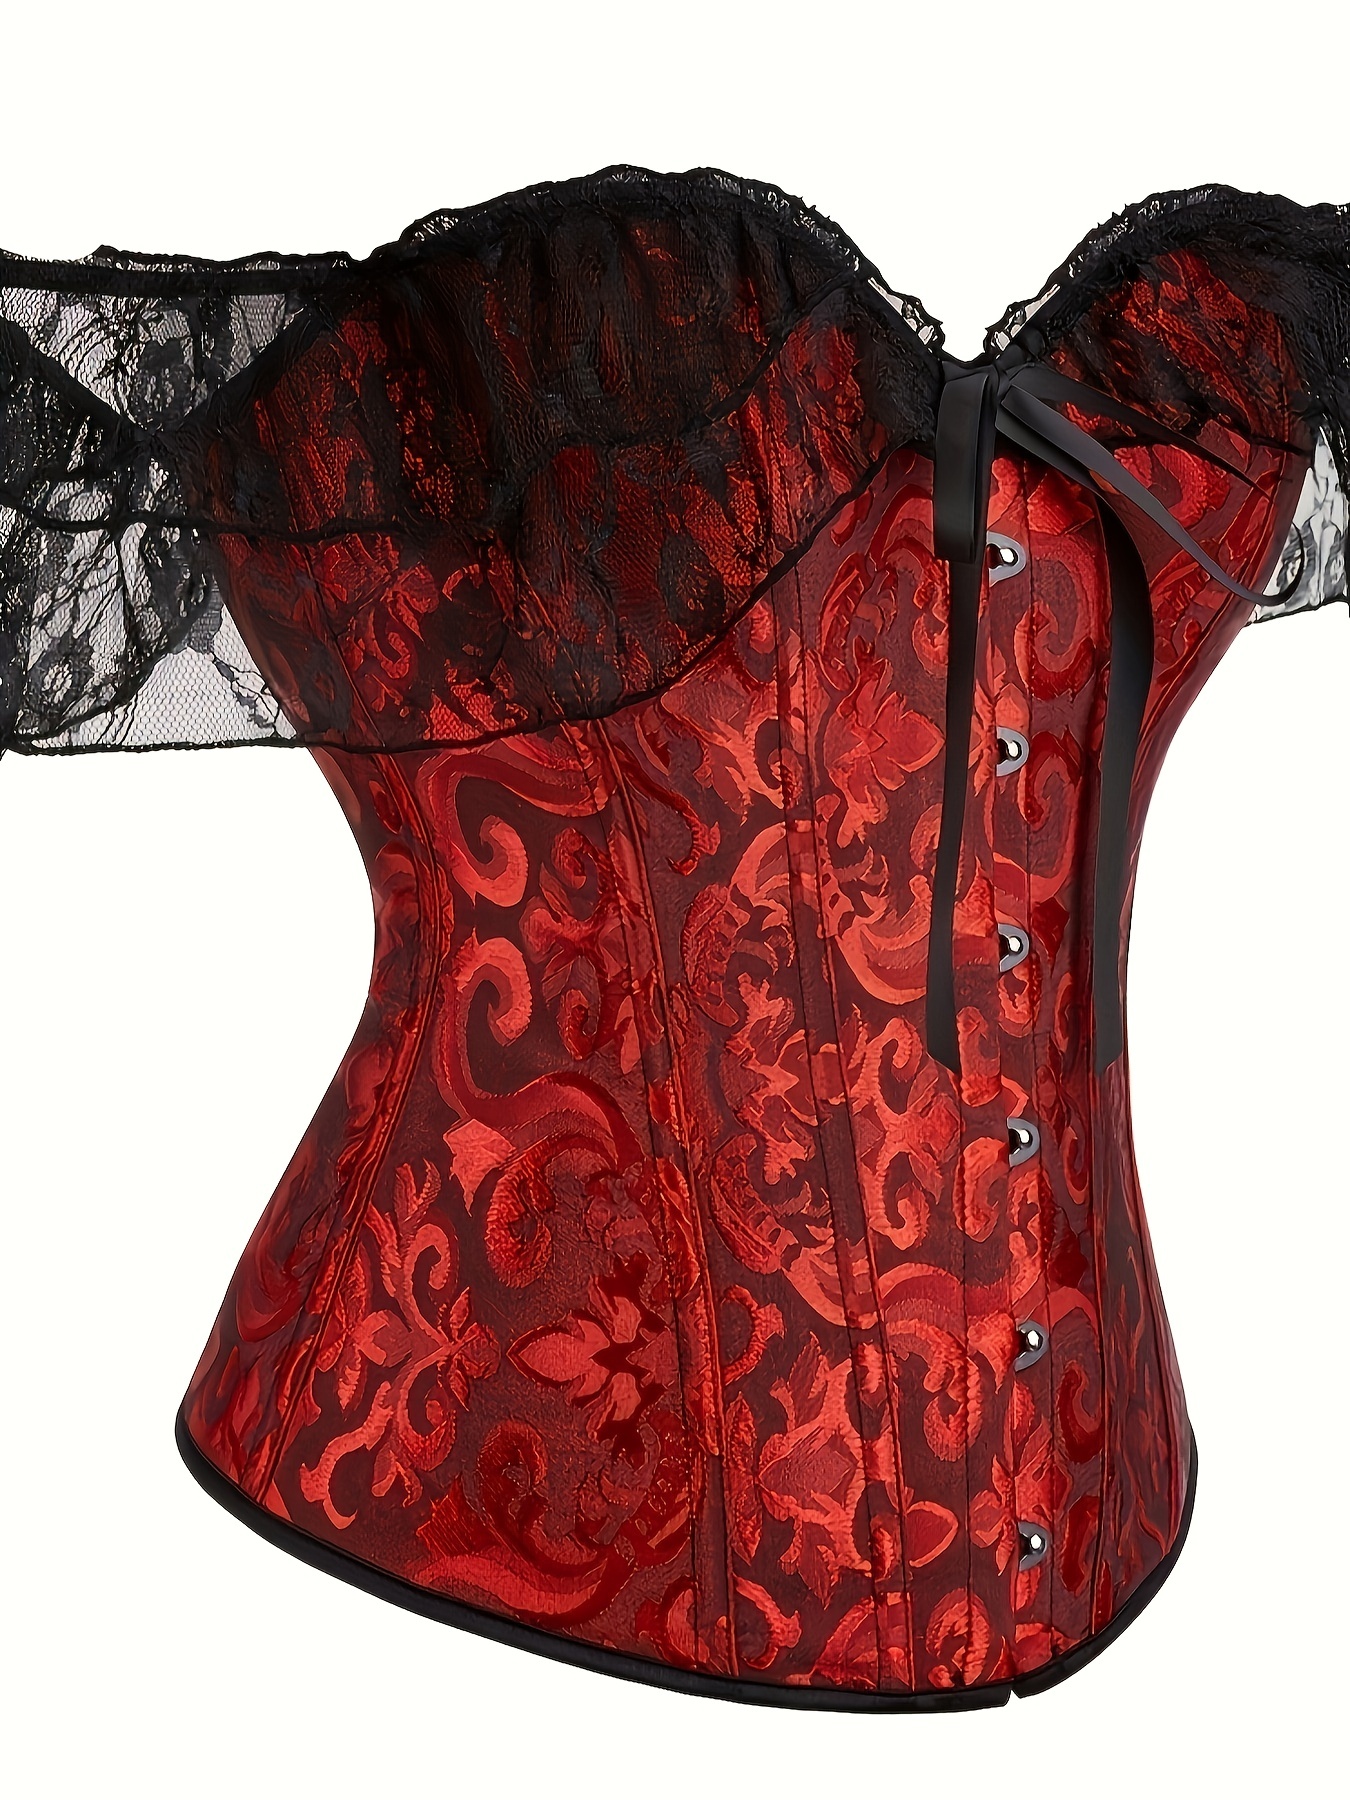  Black And Red Corset For Women - Bustier Shapewear